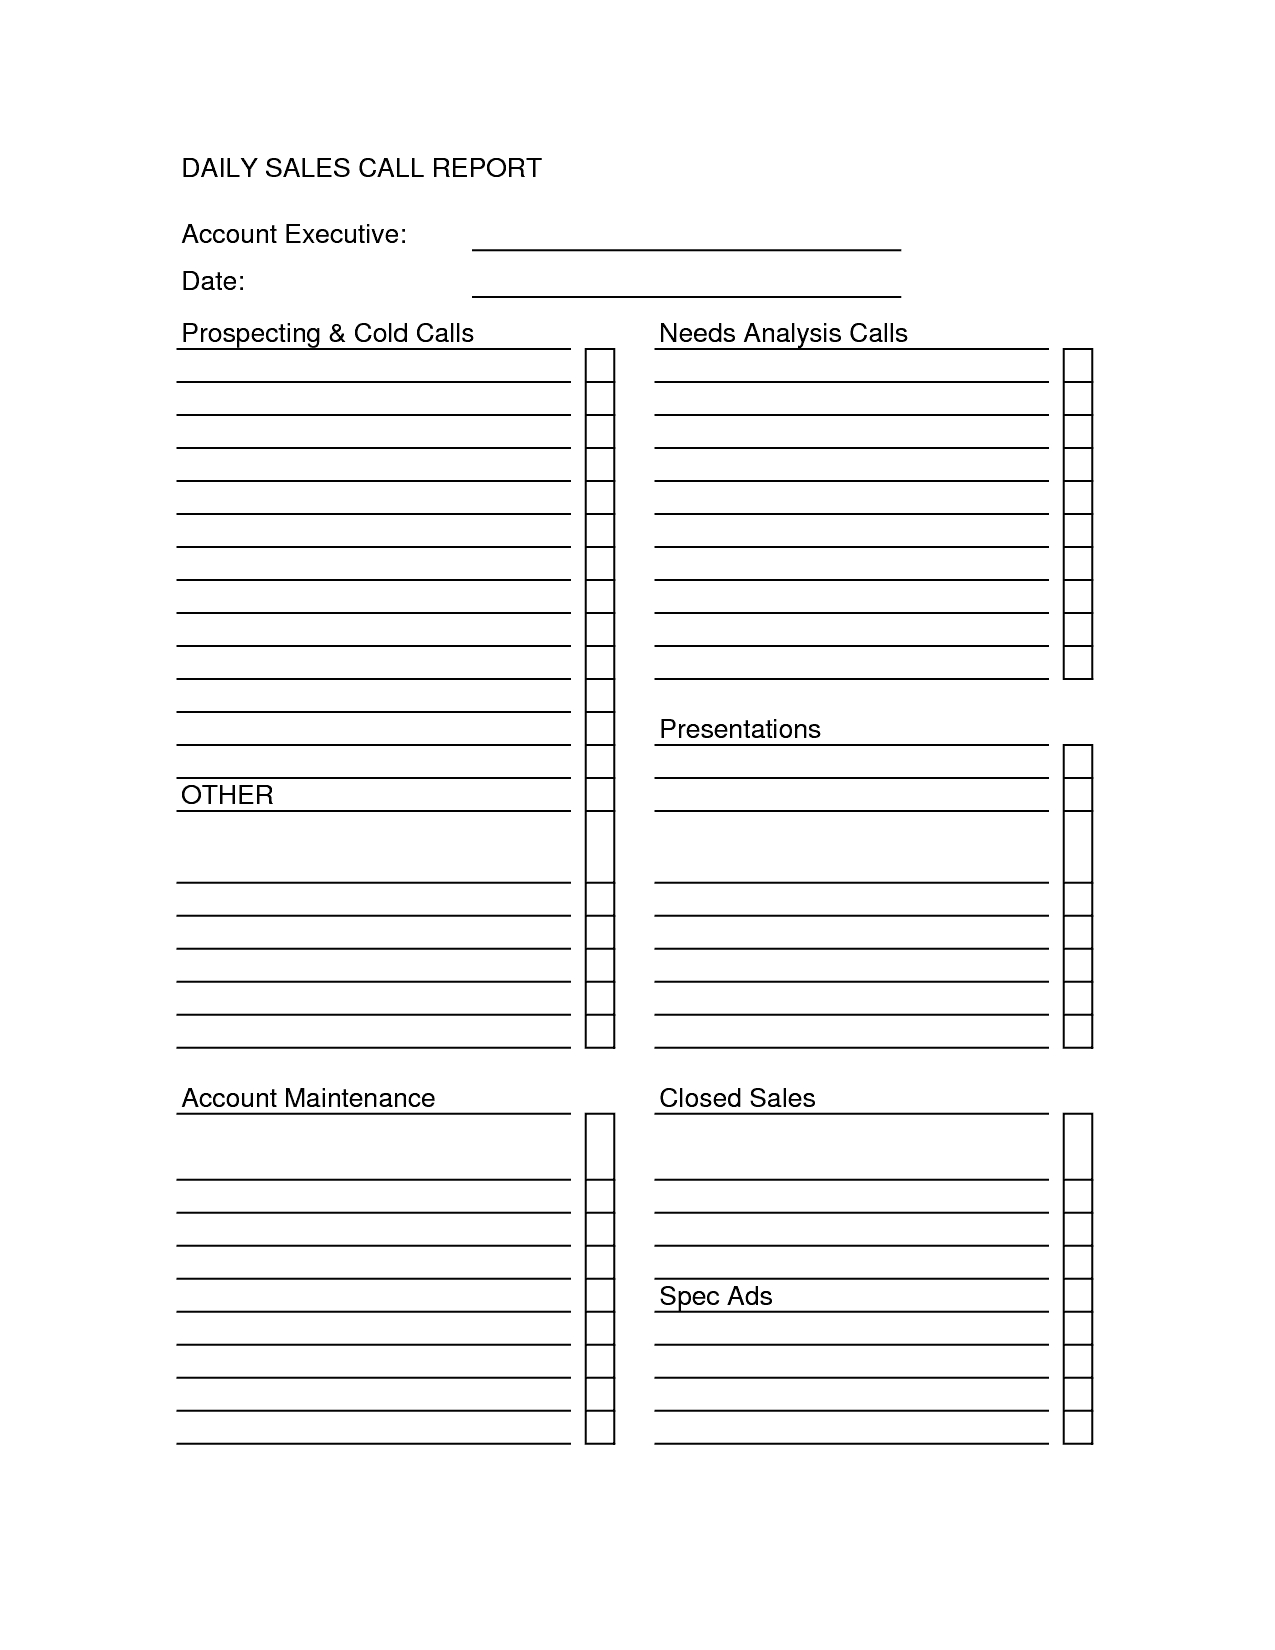 Sales Call Report Templates - Word Excel Fomats Regarding Sales Rep Call Report Template